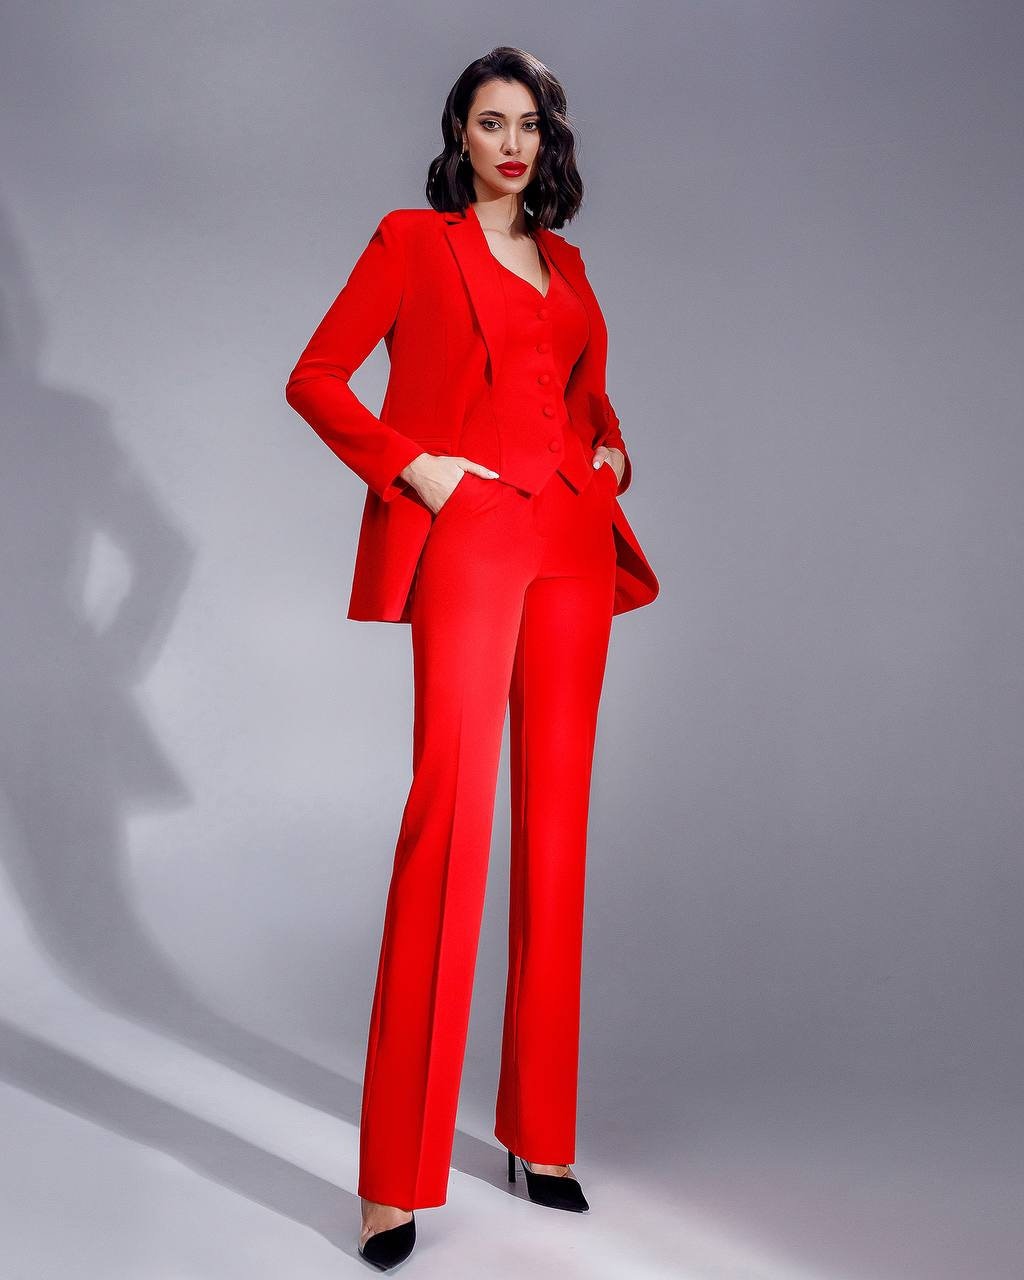 Red Formal Pantsuit for Women, Red Pants Suit for Office, Business Suit  Womens, Red Blazer Trouser Suit for Women -  Finland